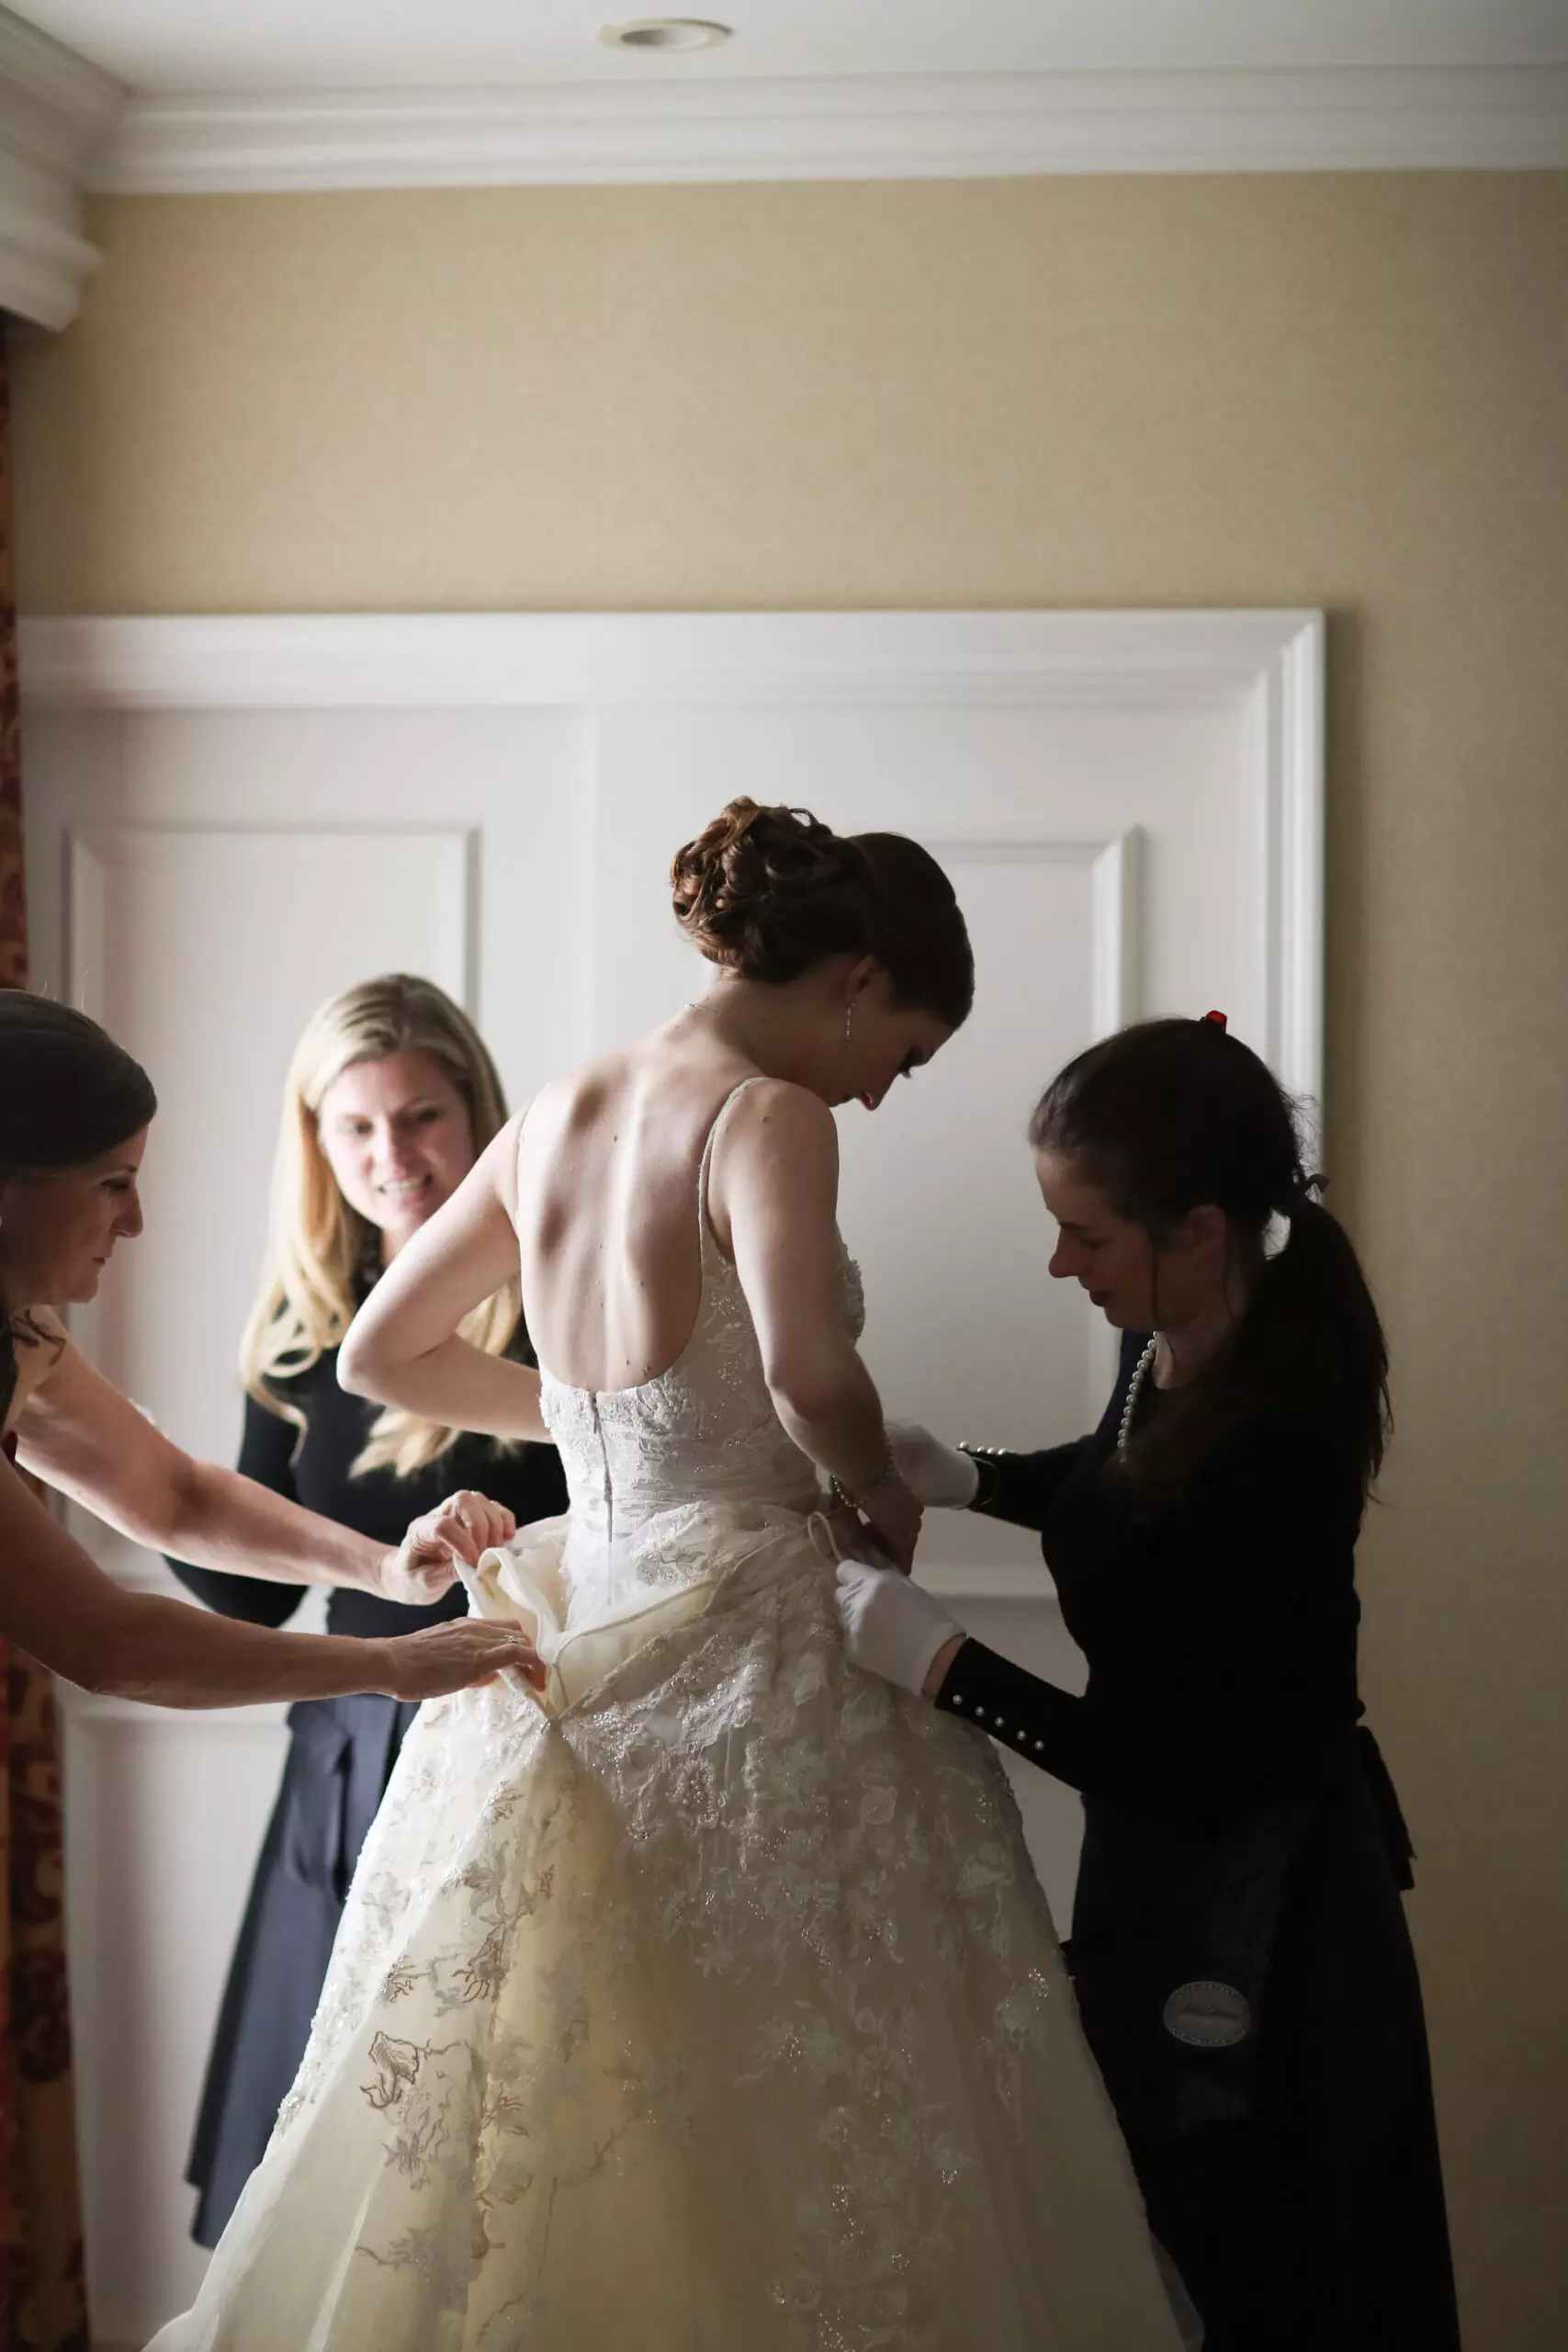 The Stylish Bride wedding day dressers, stylists, ladies in waiting